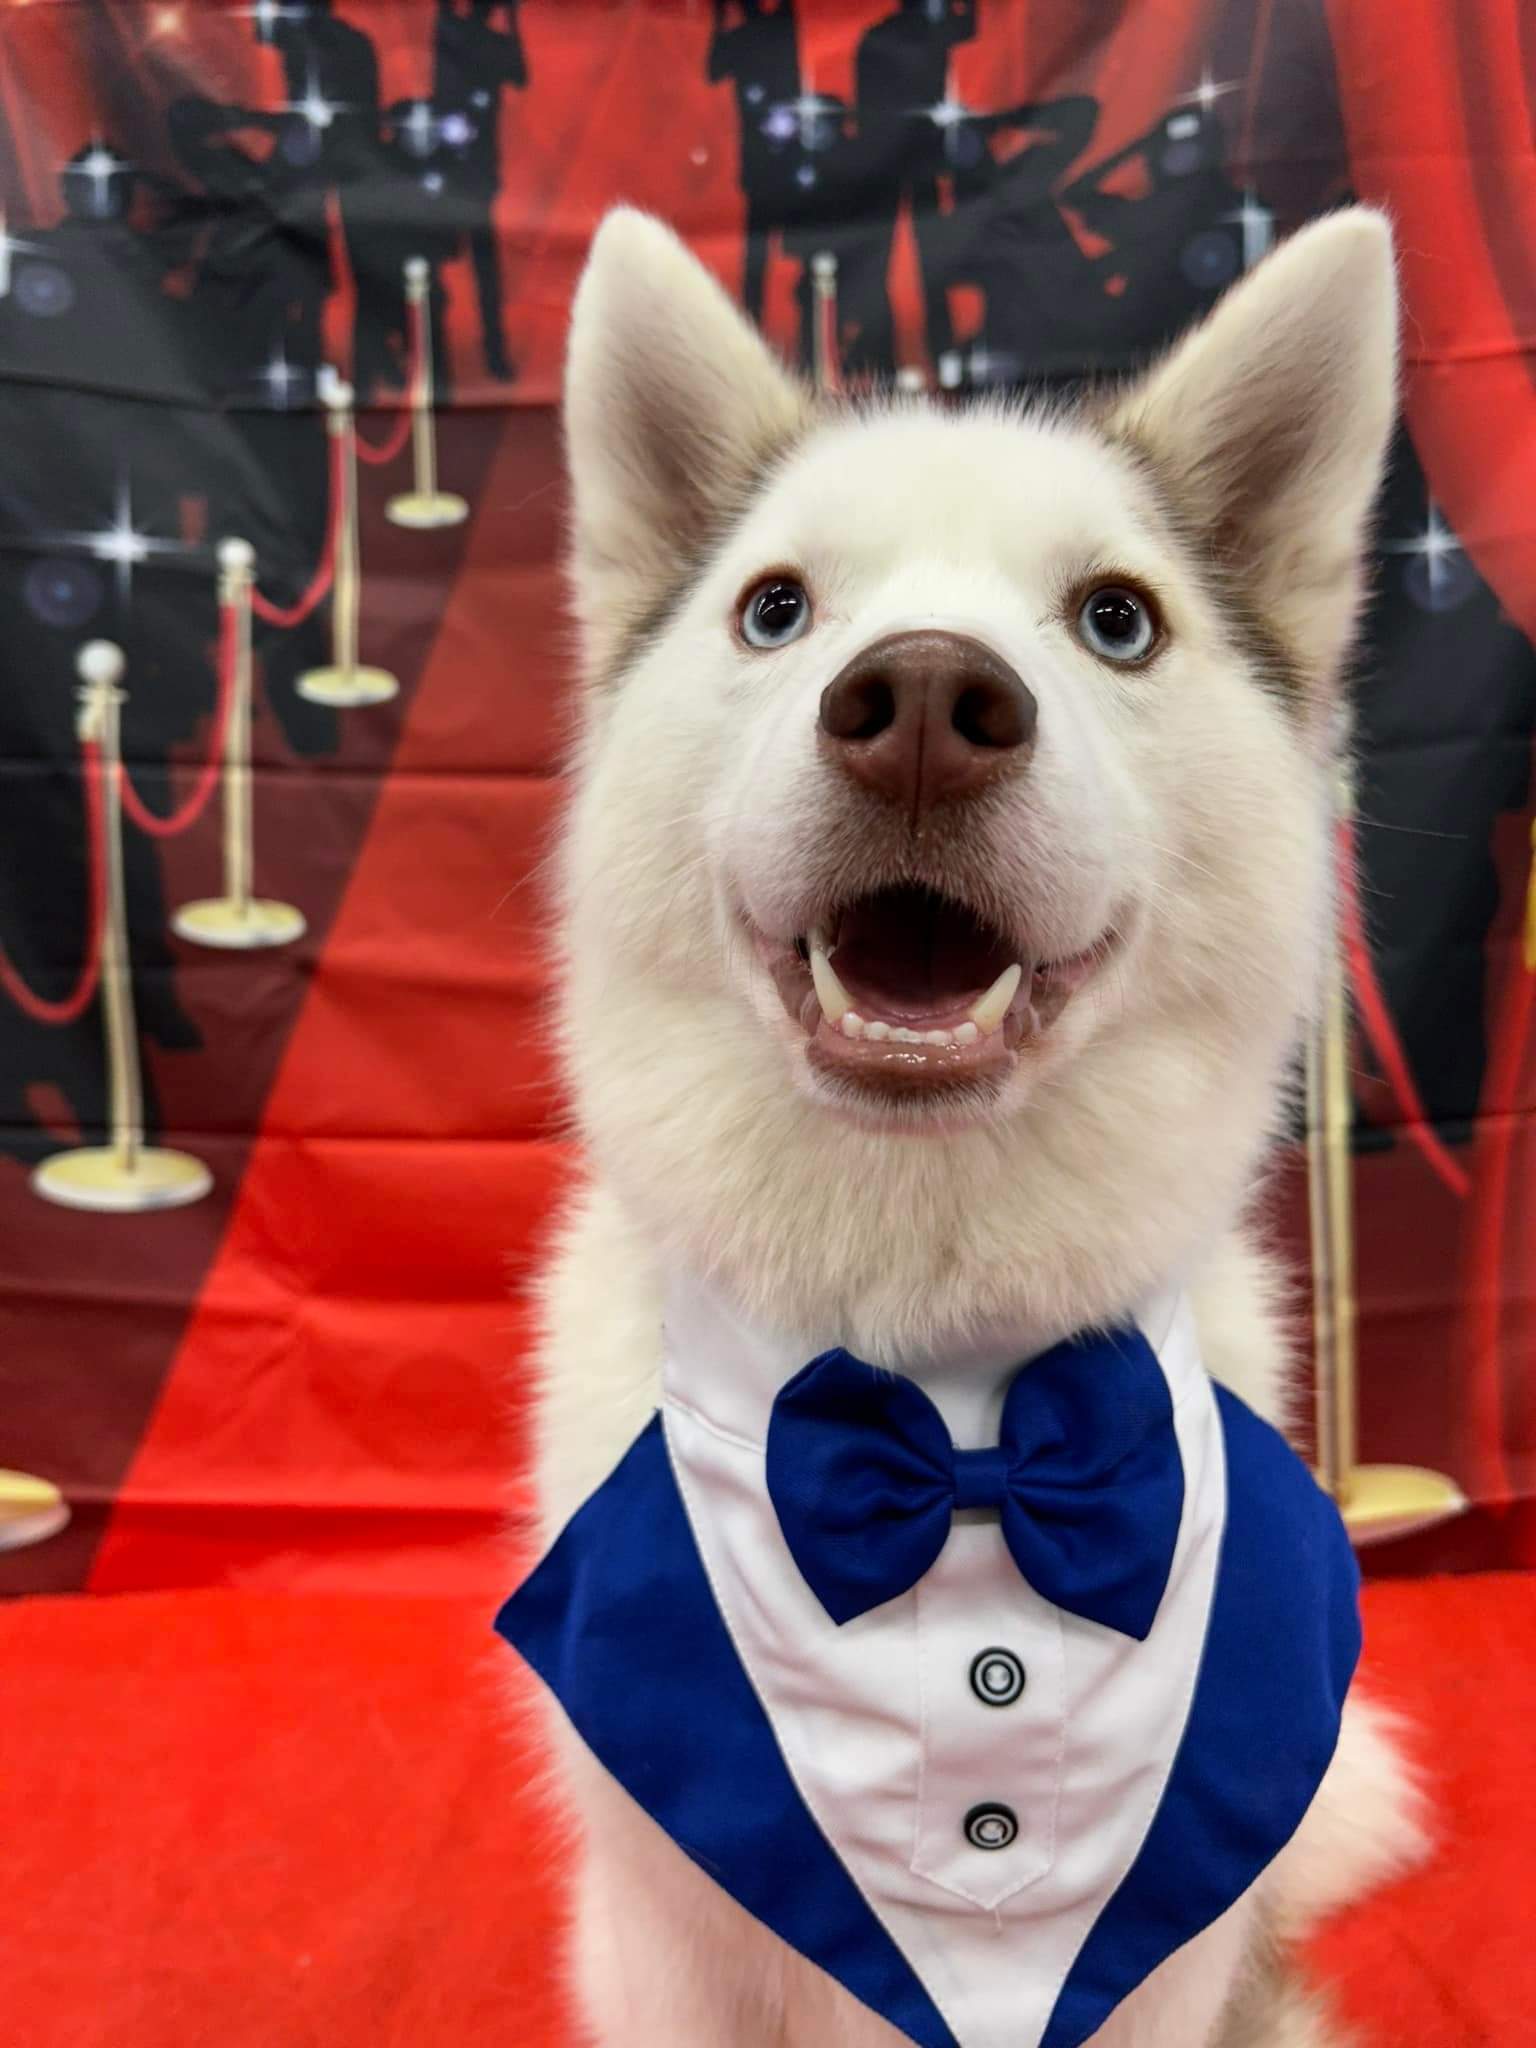 husky smiling and wearing a bow tie